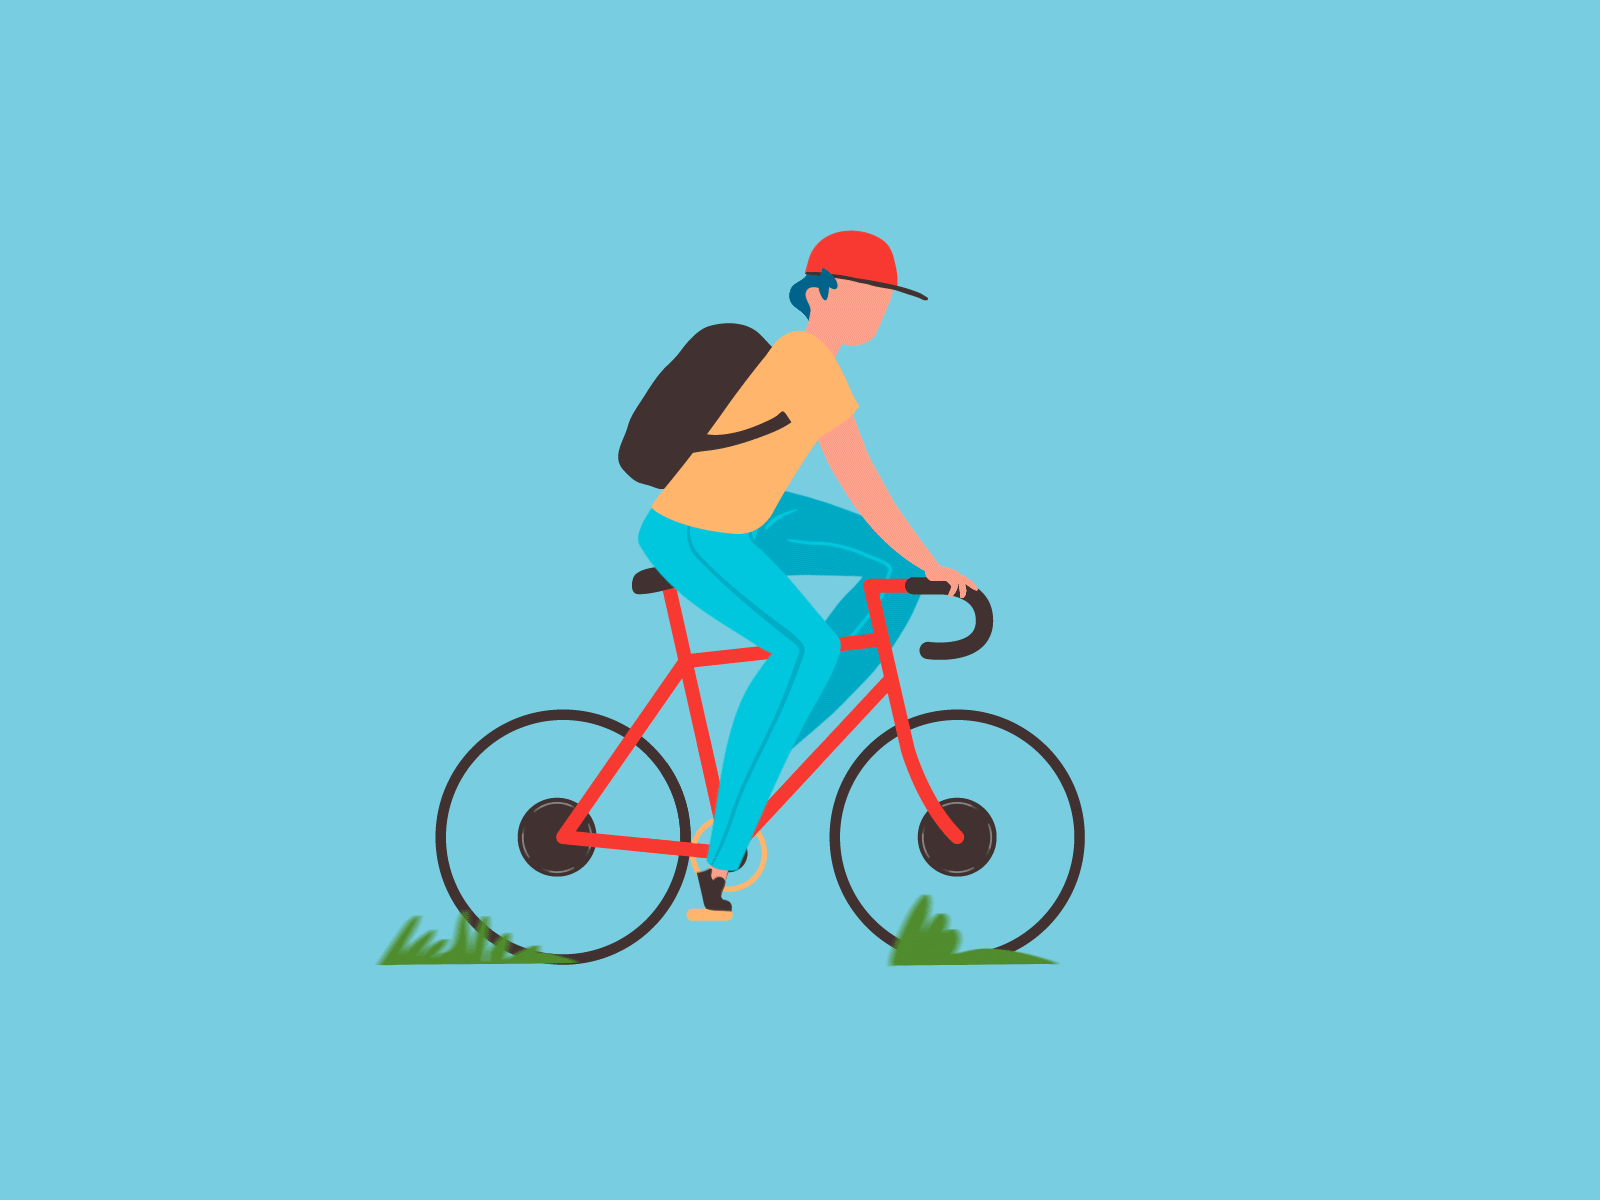 Character Cycling, Bicycle Animation - After Effects Tutorial aftereffects animation animation 2d animation after effects animation design animations art cinema digitalart gif graphicdesign mdcommunity mgcollective motion motiondesign motiondesigner motiondesigners motiondesignschool motiongraphics motionlovers